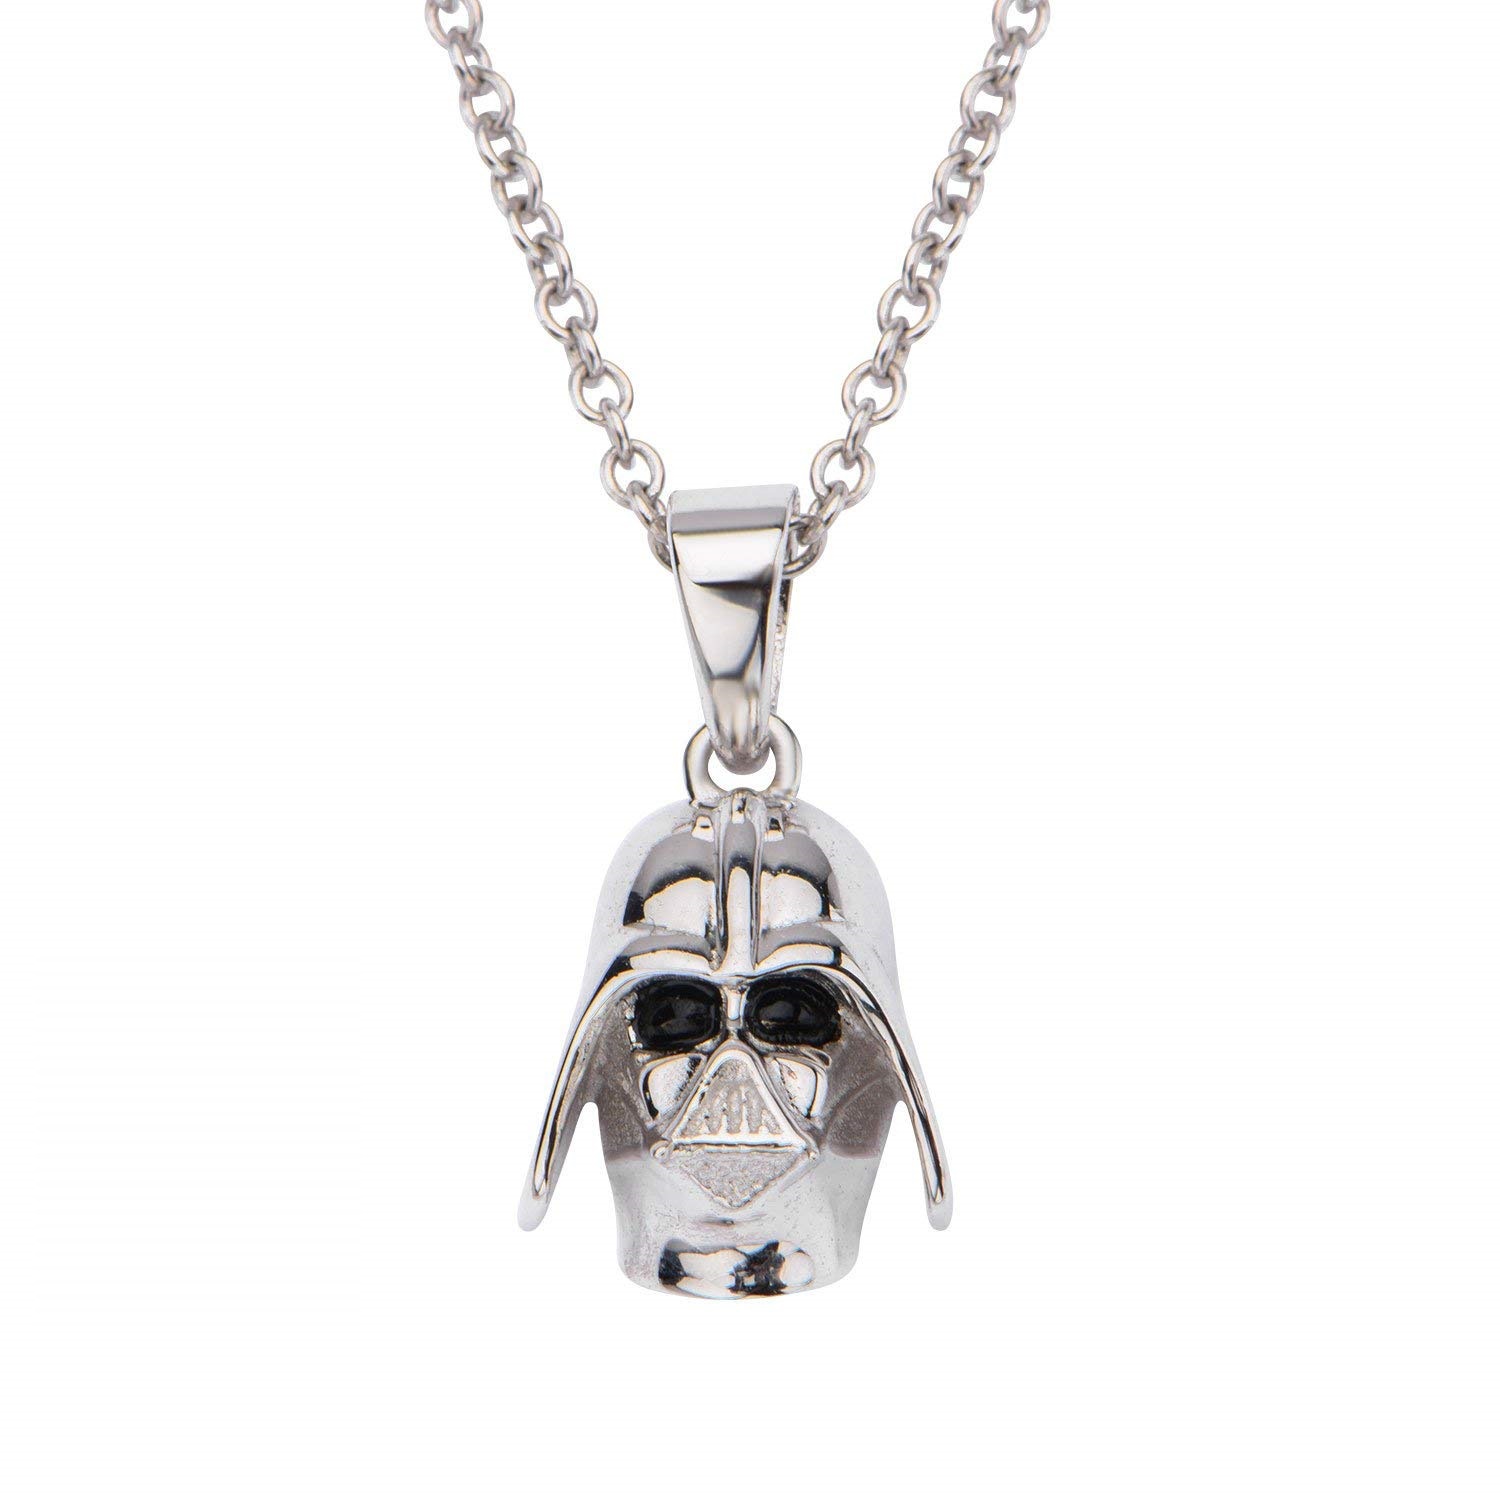 Body Vibe x Star Wars Darth Vader Sterling Silver Necklace on Amazon